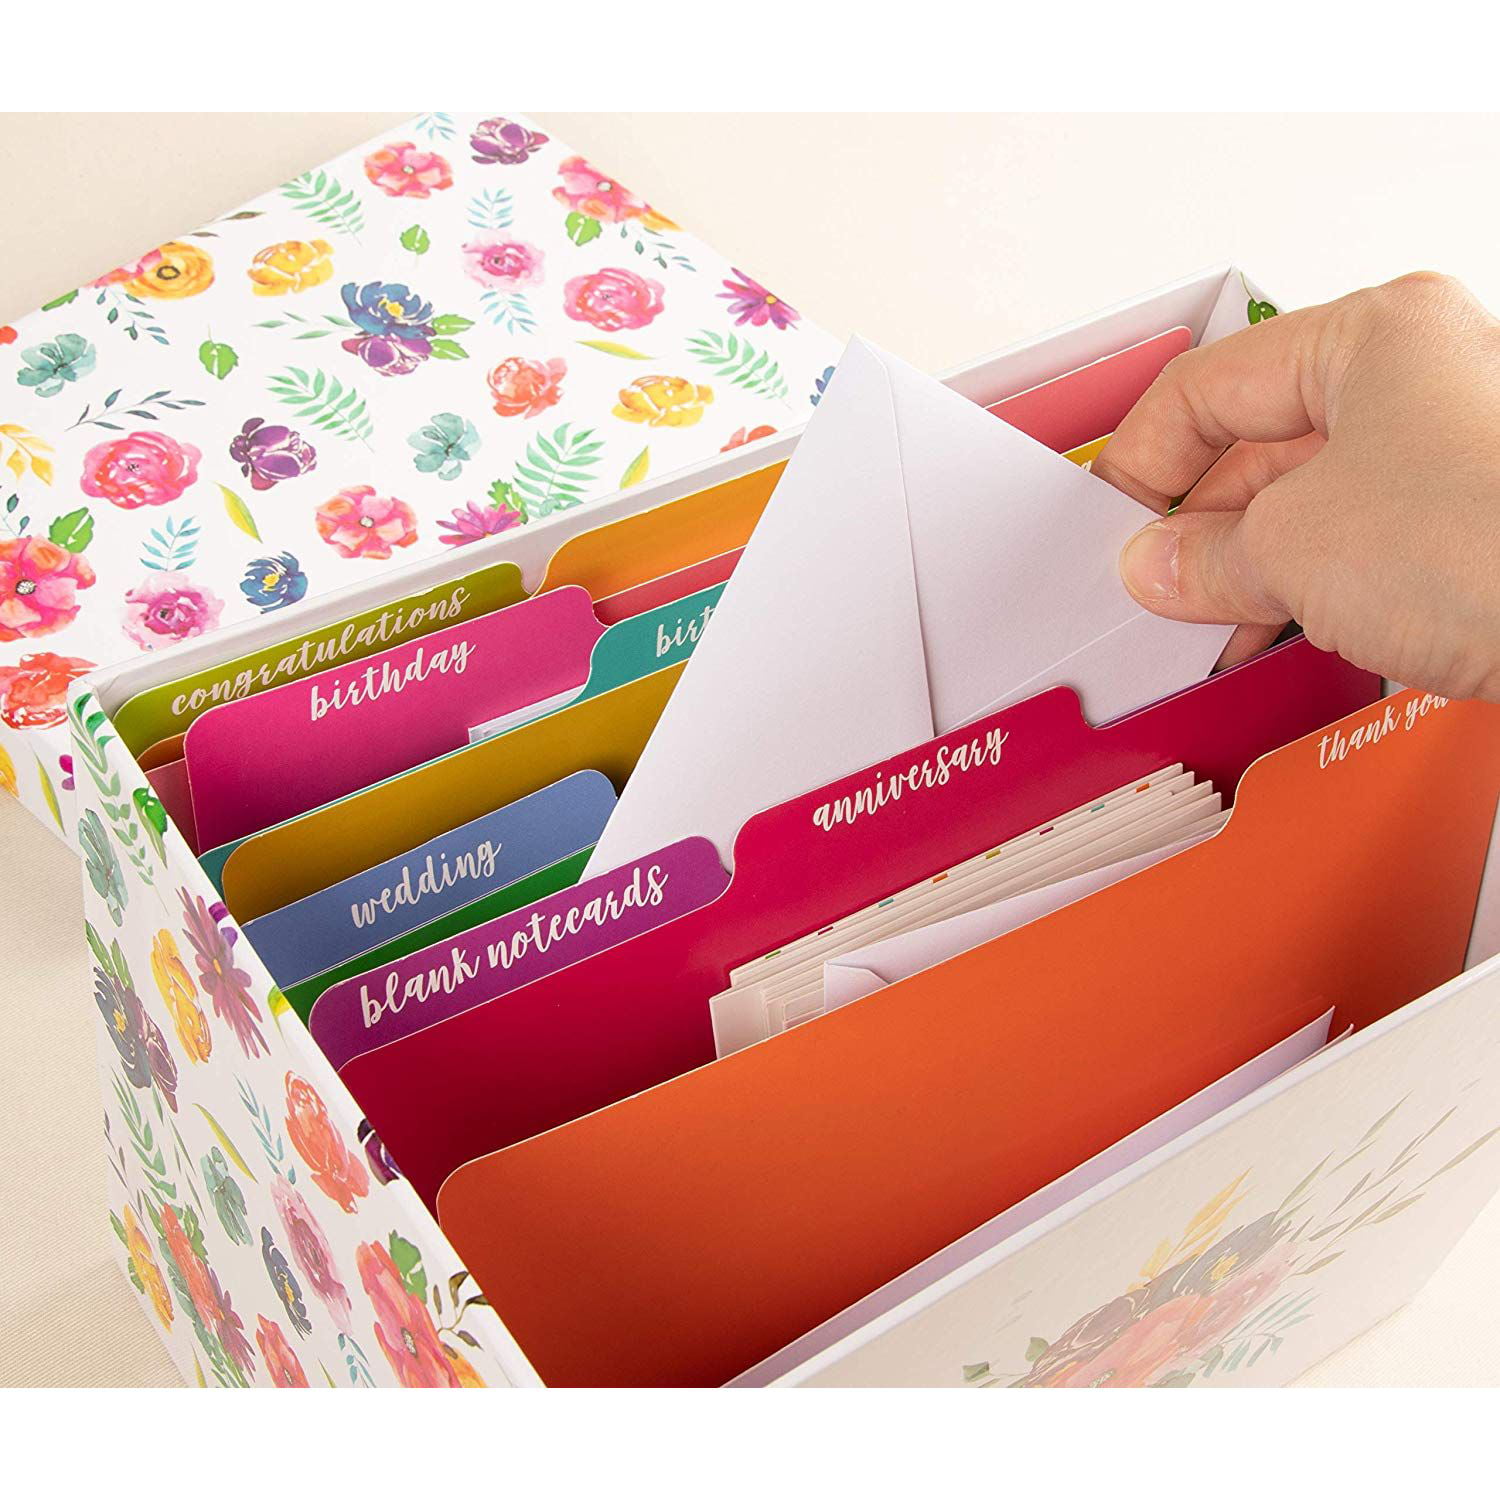 9.6 x 6 x 7.5 Inches 20 Notecards Decorative Card Storage 20 Envelopes Greeting Birthday Holiday Card Organizer Box Deluxe Card Organizer with 12 Dividers